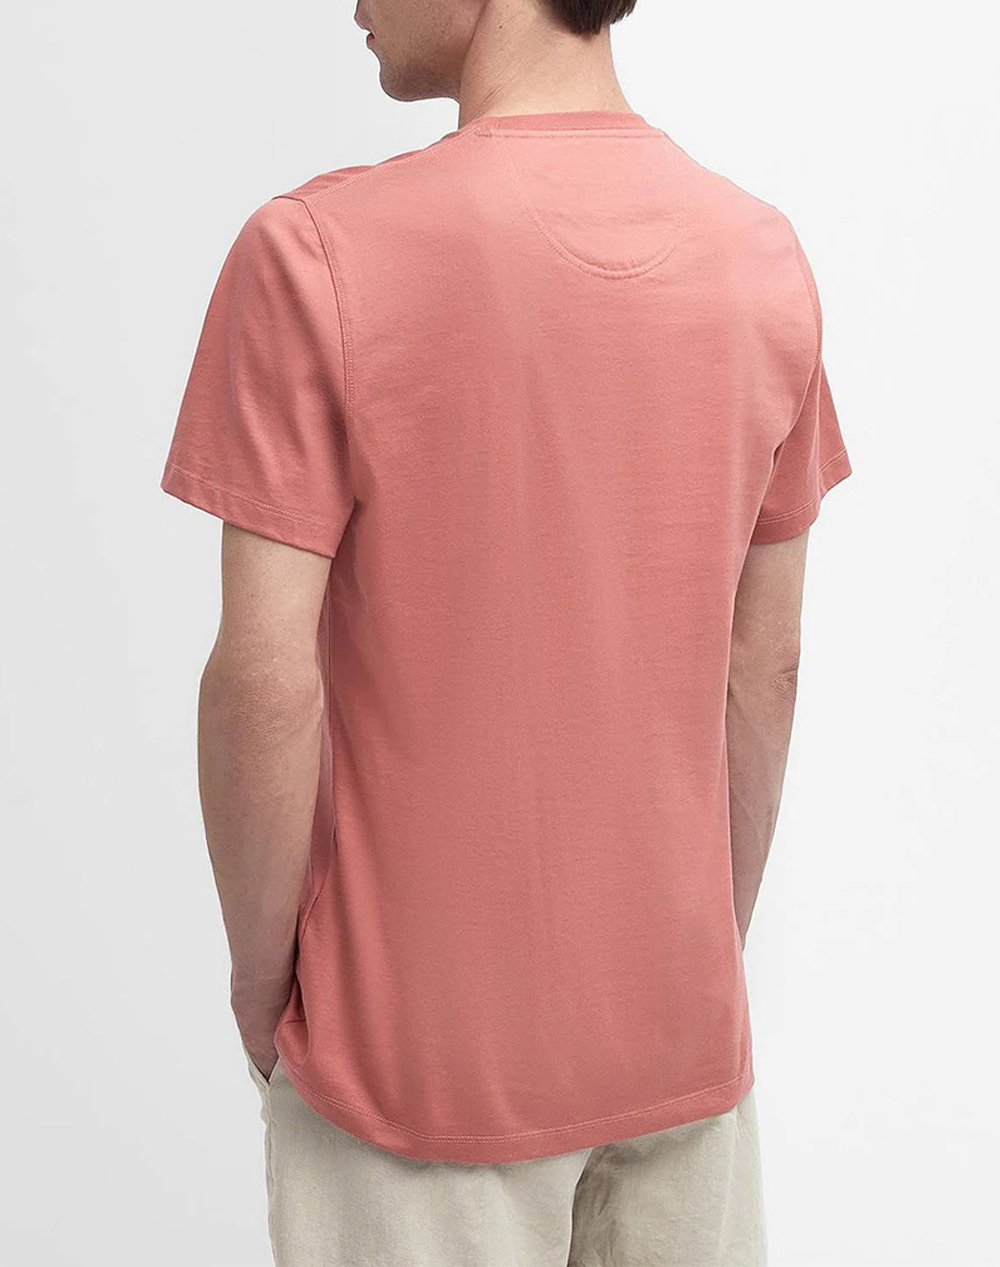 BARBOUR T-SHIRT S/S ESSENTIAL SPORTS TEE